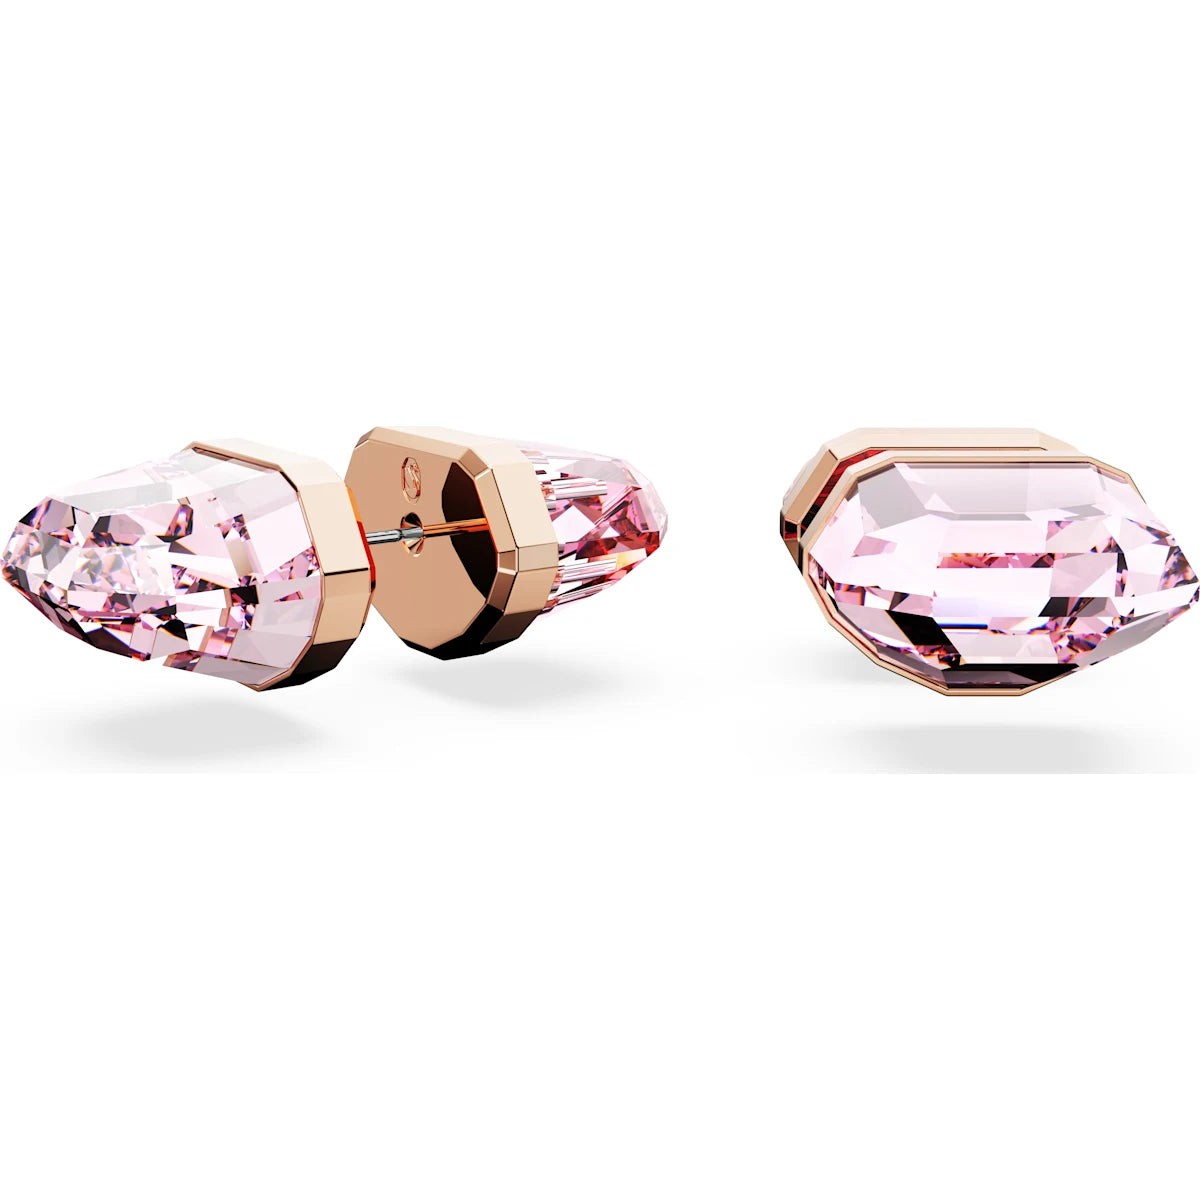 Swarovski Lucent stud earrings, Pink, Rose gold-tone plated 5626603- Discontinued